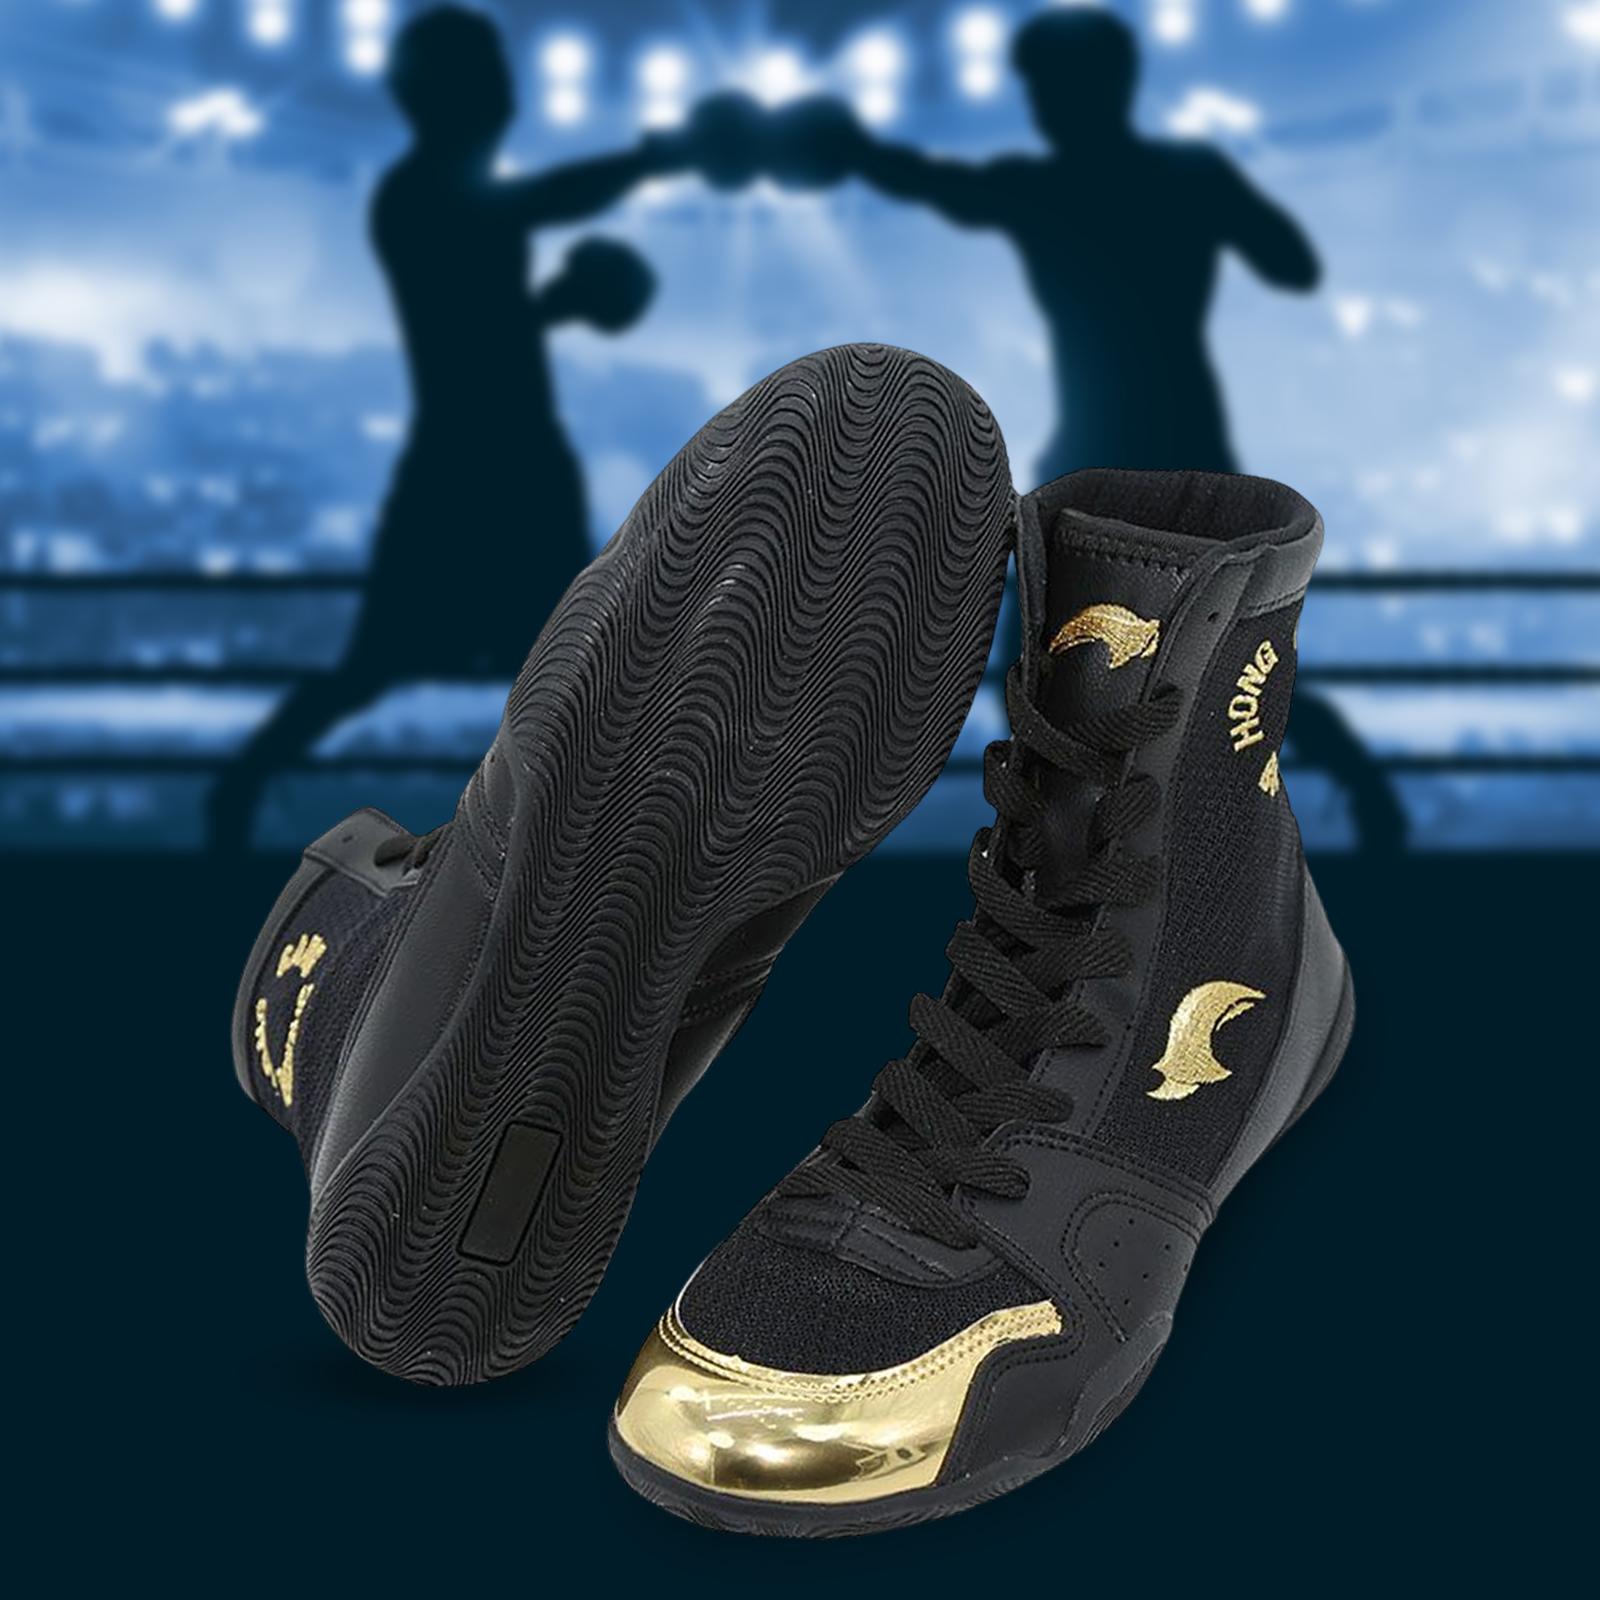 Kick Boxing Shoes Wrestling Boots Practice for Grappling Taekwondo Mma 40